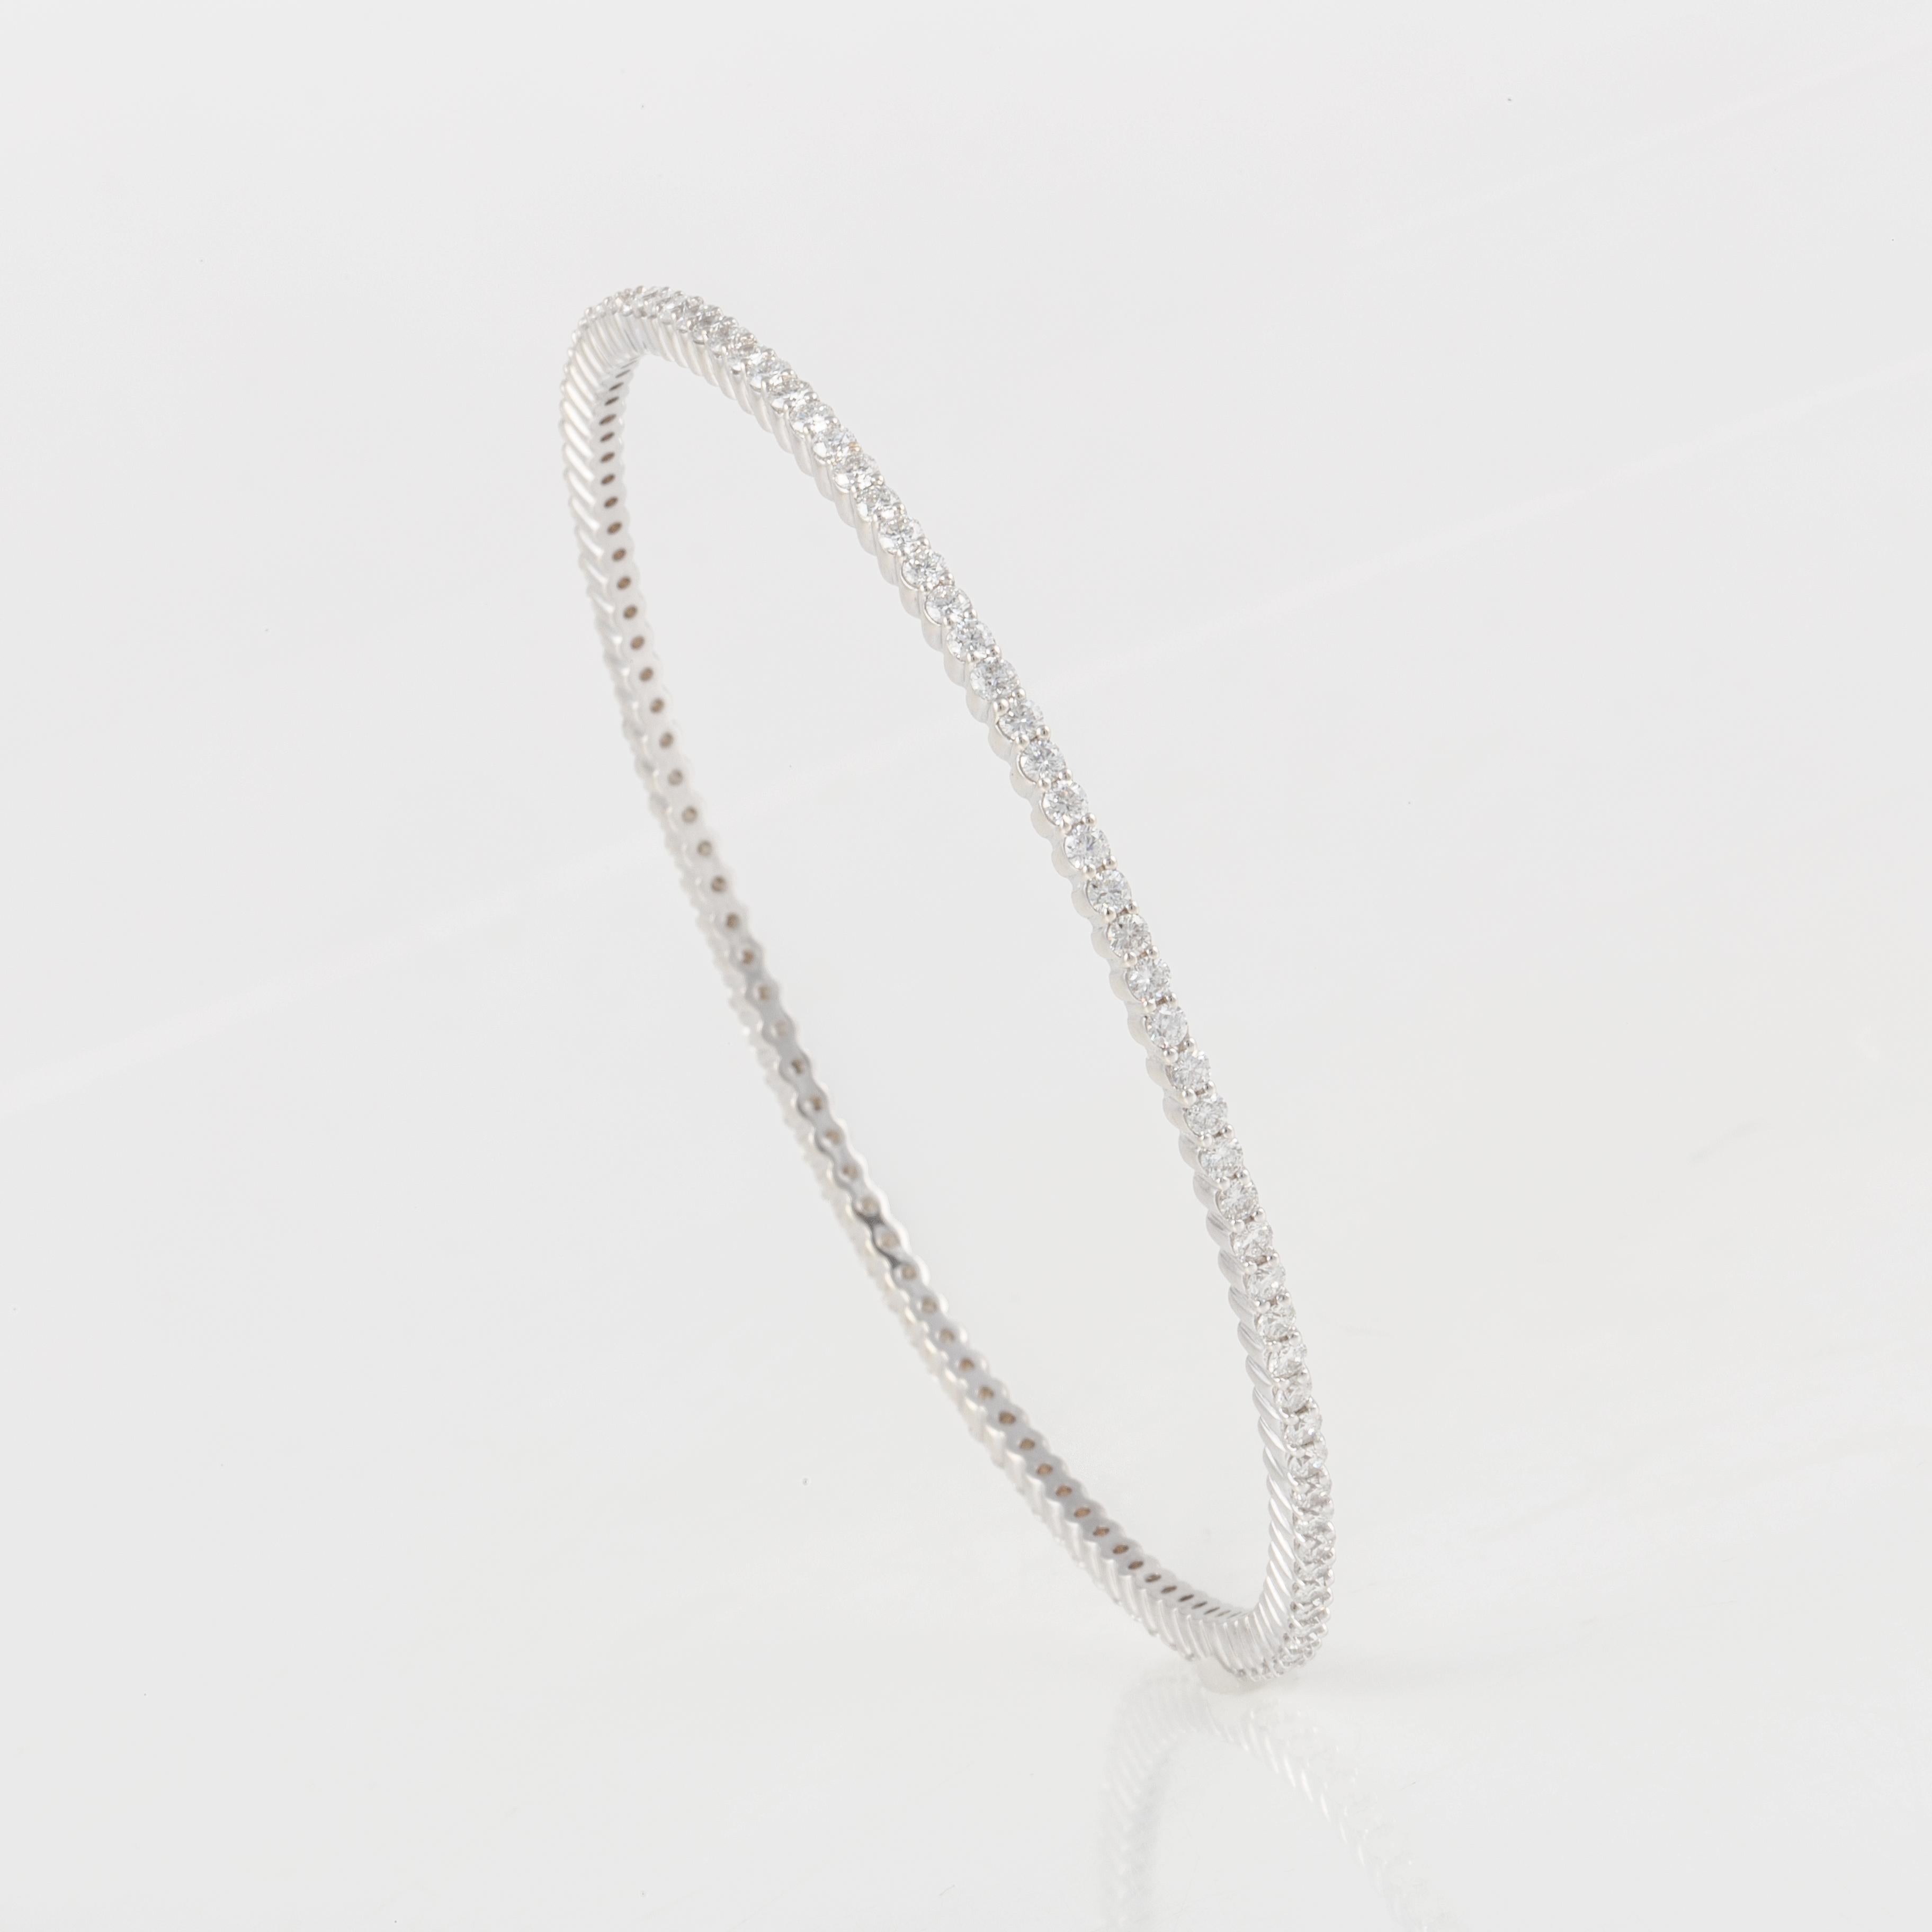 18K white gold slip on bangle bracelet with round diamonds going all the way around.  There are a total of 104 diamonds that total 3.15 carats; H-I color and SI clarity. The measurements from the inside are 2 1/2 inches in diameter and the bangle is